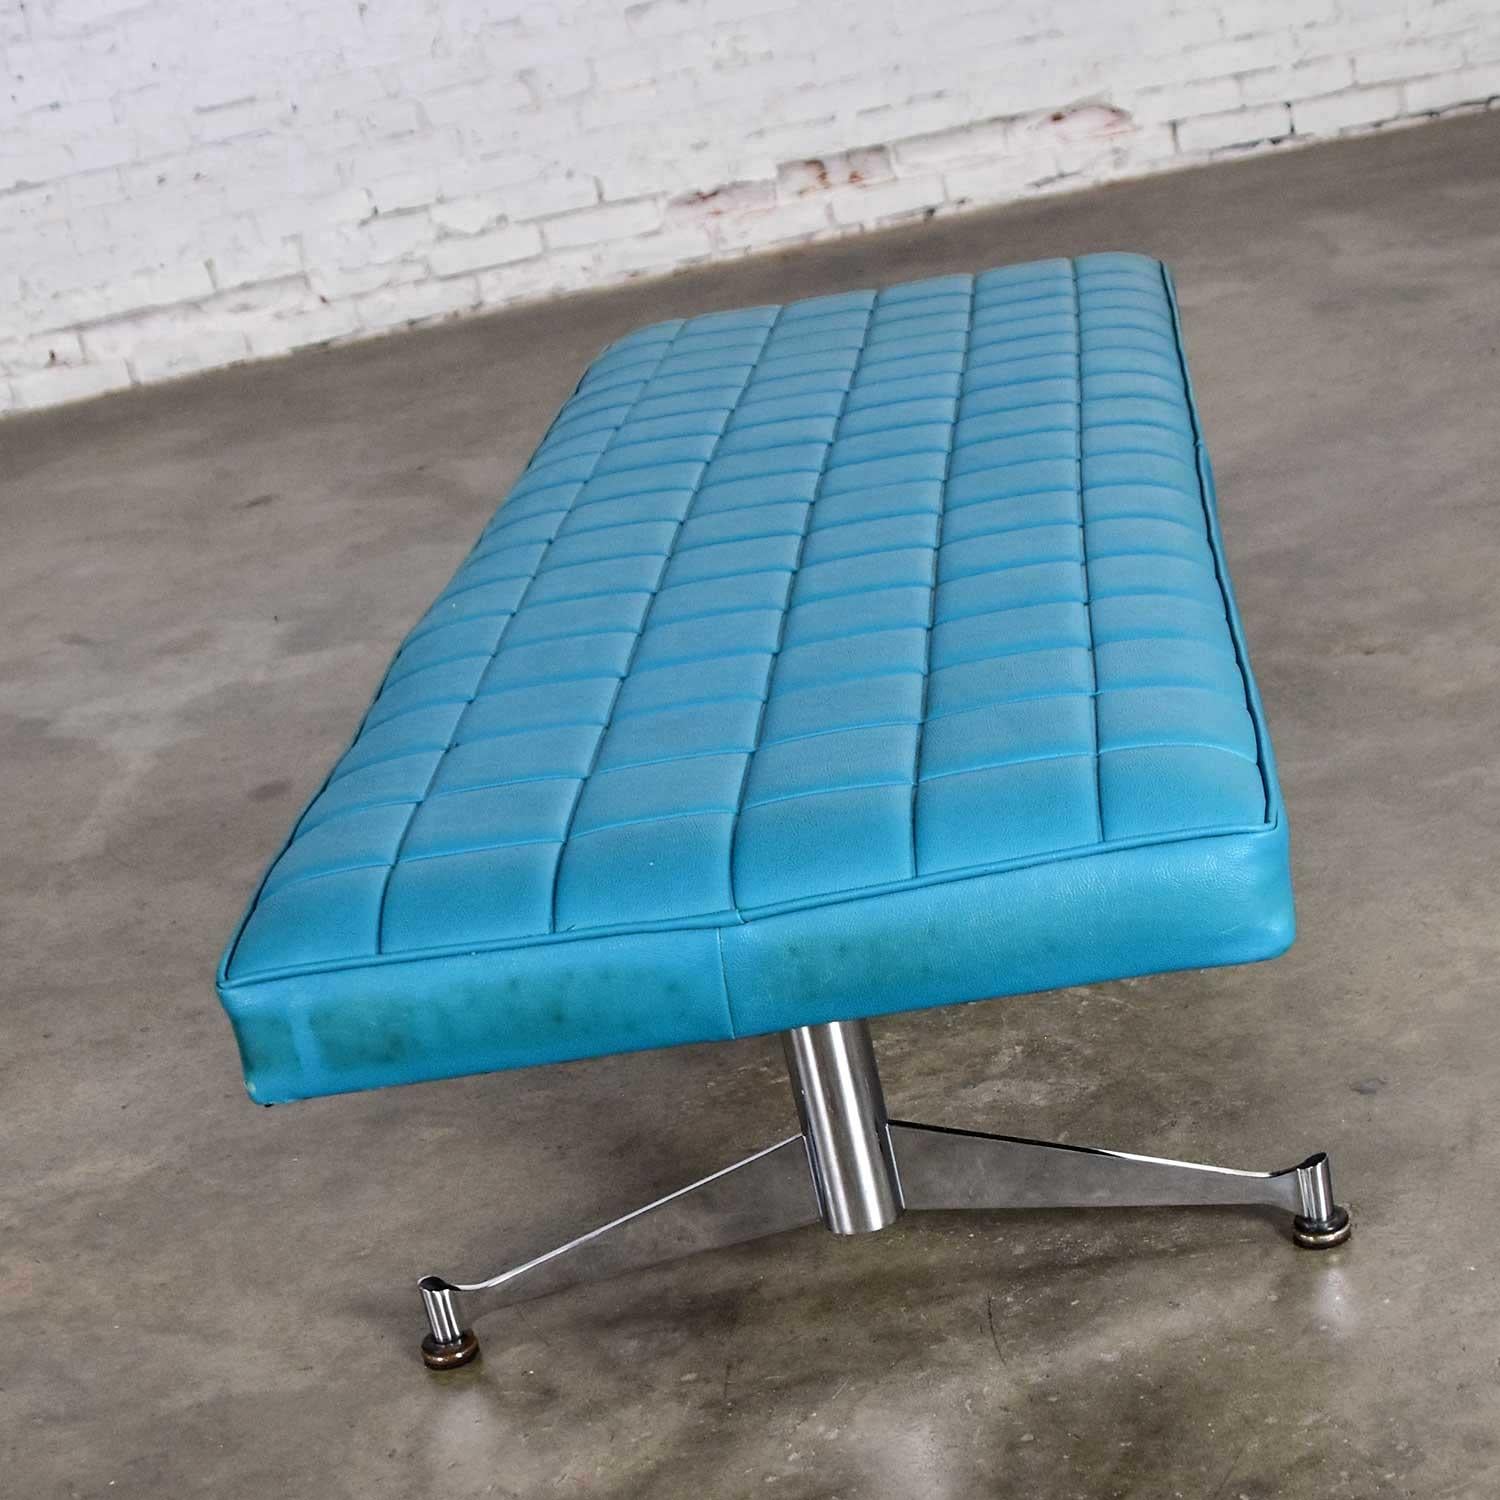 20th Century Madison Furn. Vinyl Faux Leather Turquoise Chrome Bench Daybed Style A. Umanoff For Sale